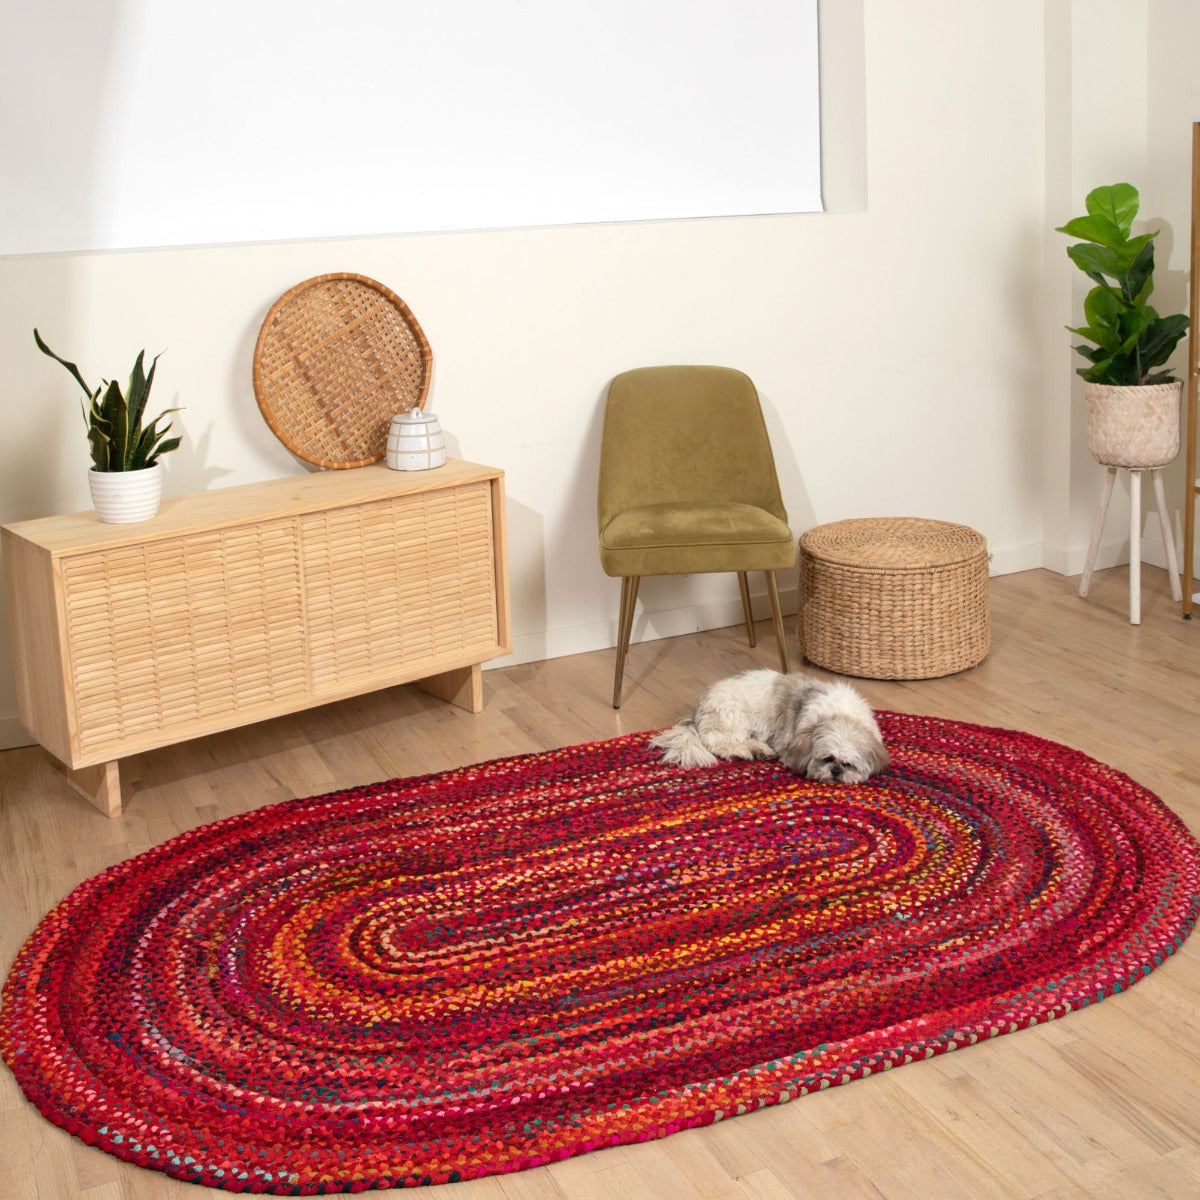 Cotton Braided Rugs